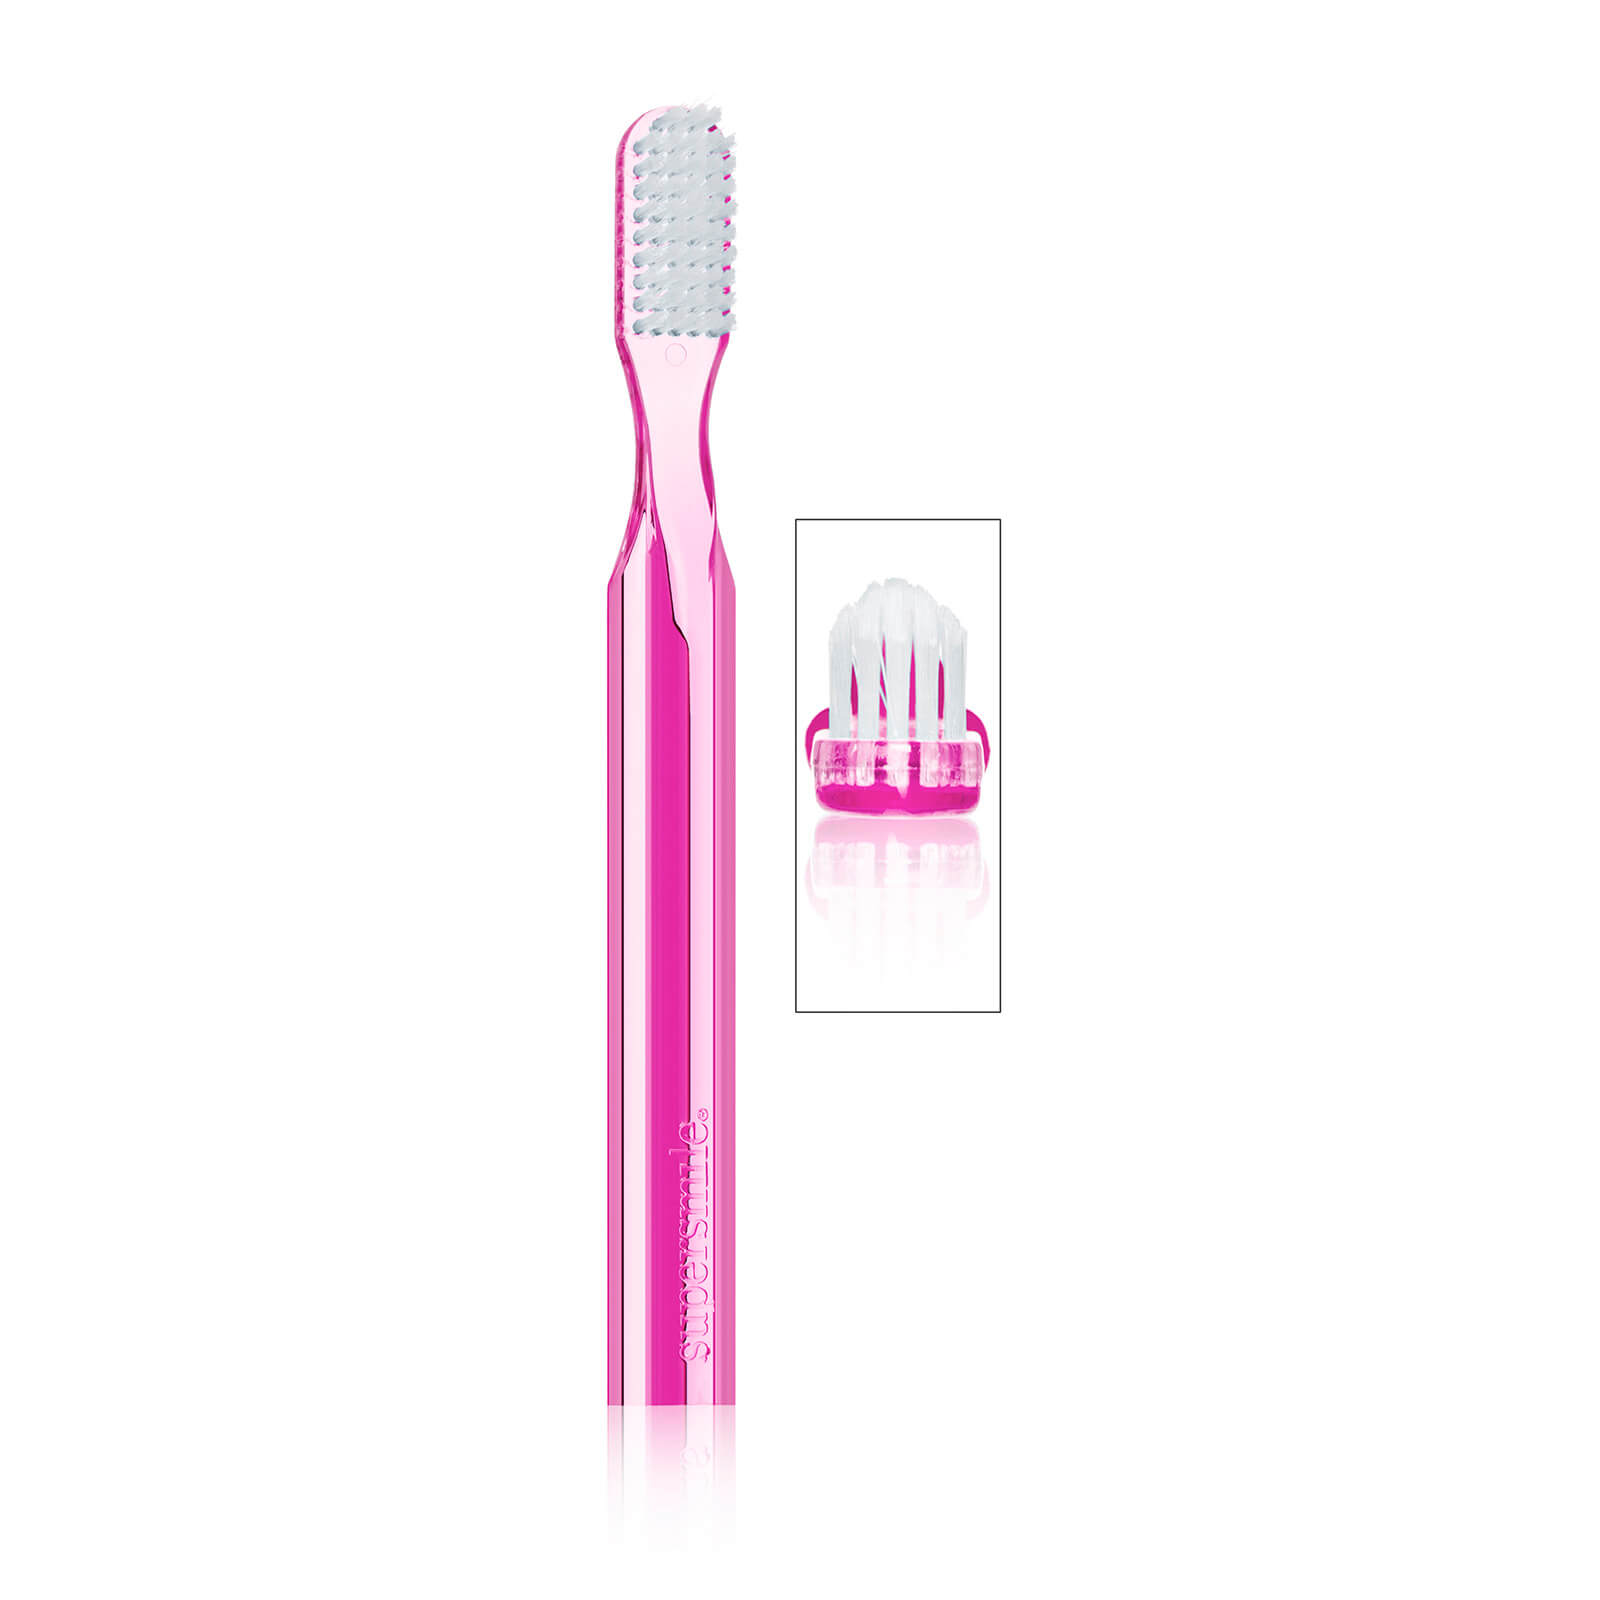 SUPERSMILE 45 DEGREE ANGLED TOOTHBRUSH (1 PIECE)